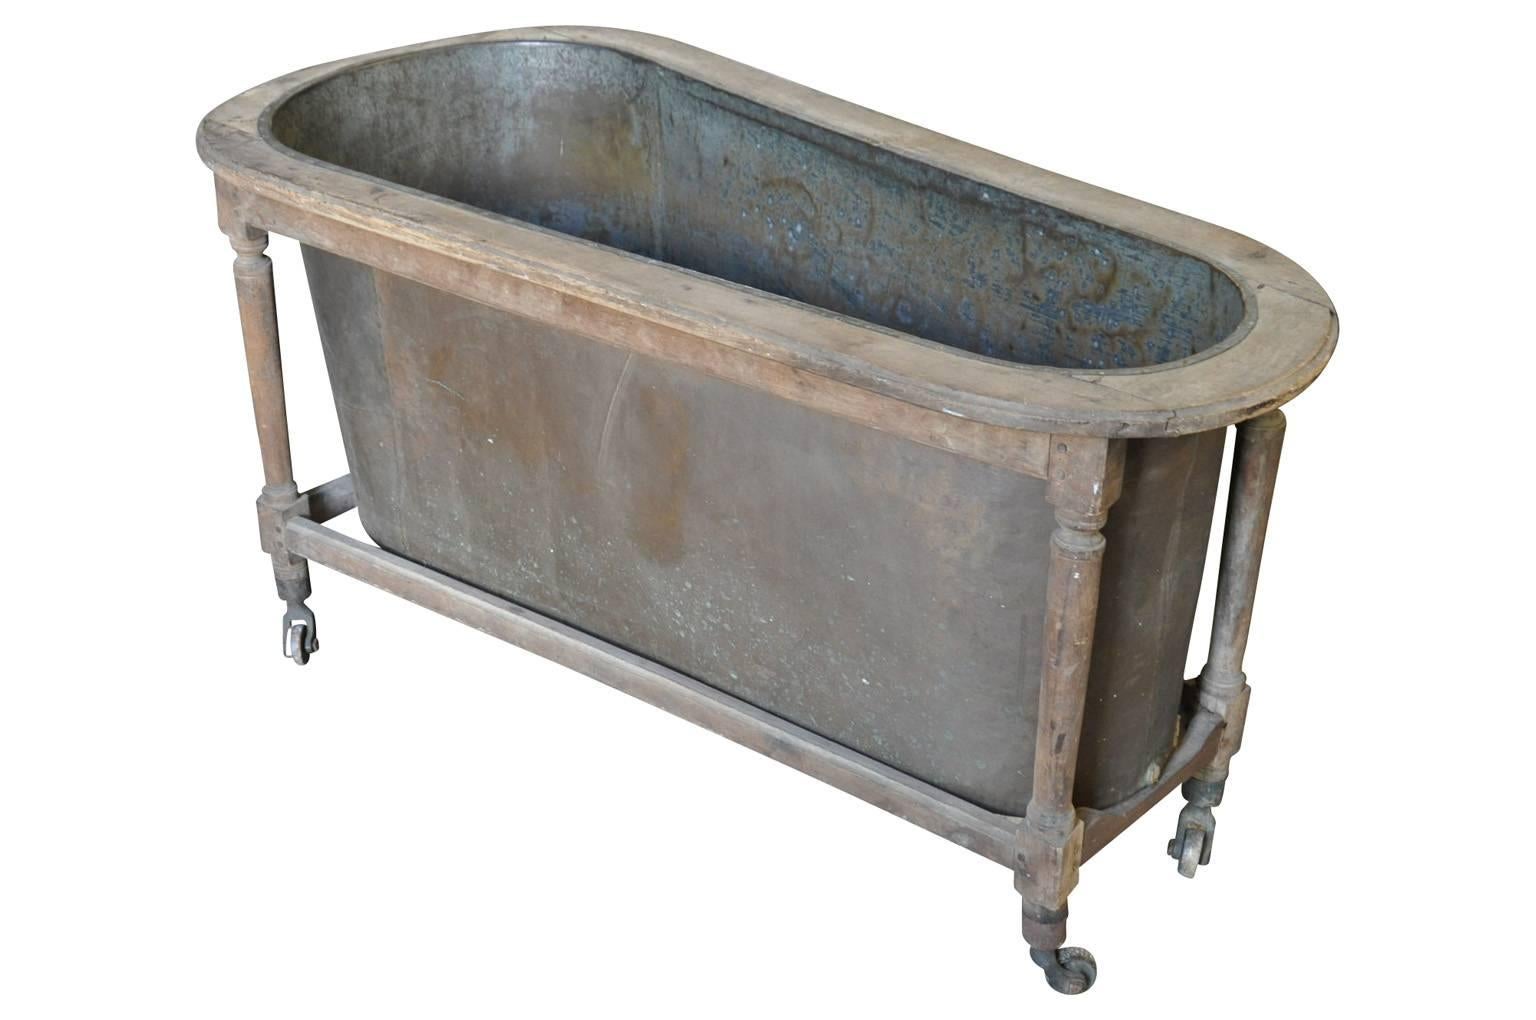 A delightful early 19th century French bathtub constructed from copper  in its walnut frame.  The tub is on metal casters.  A fabulous accessory for entertaining - wonderful to fill with ice and chill beverages!!